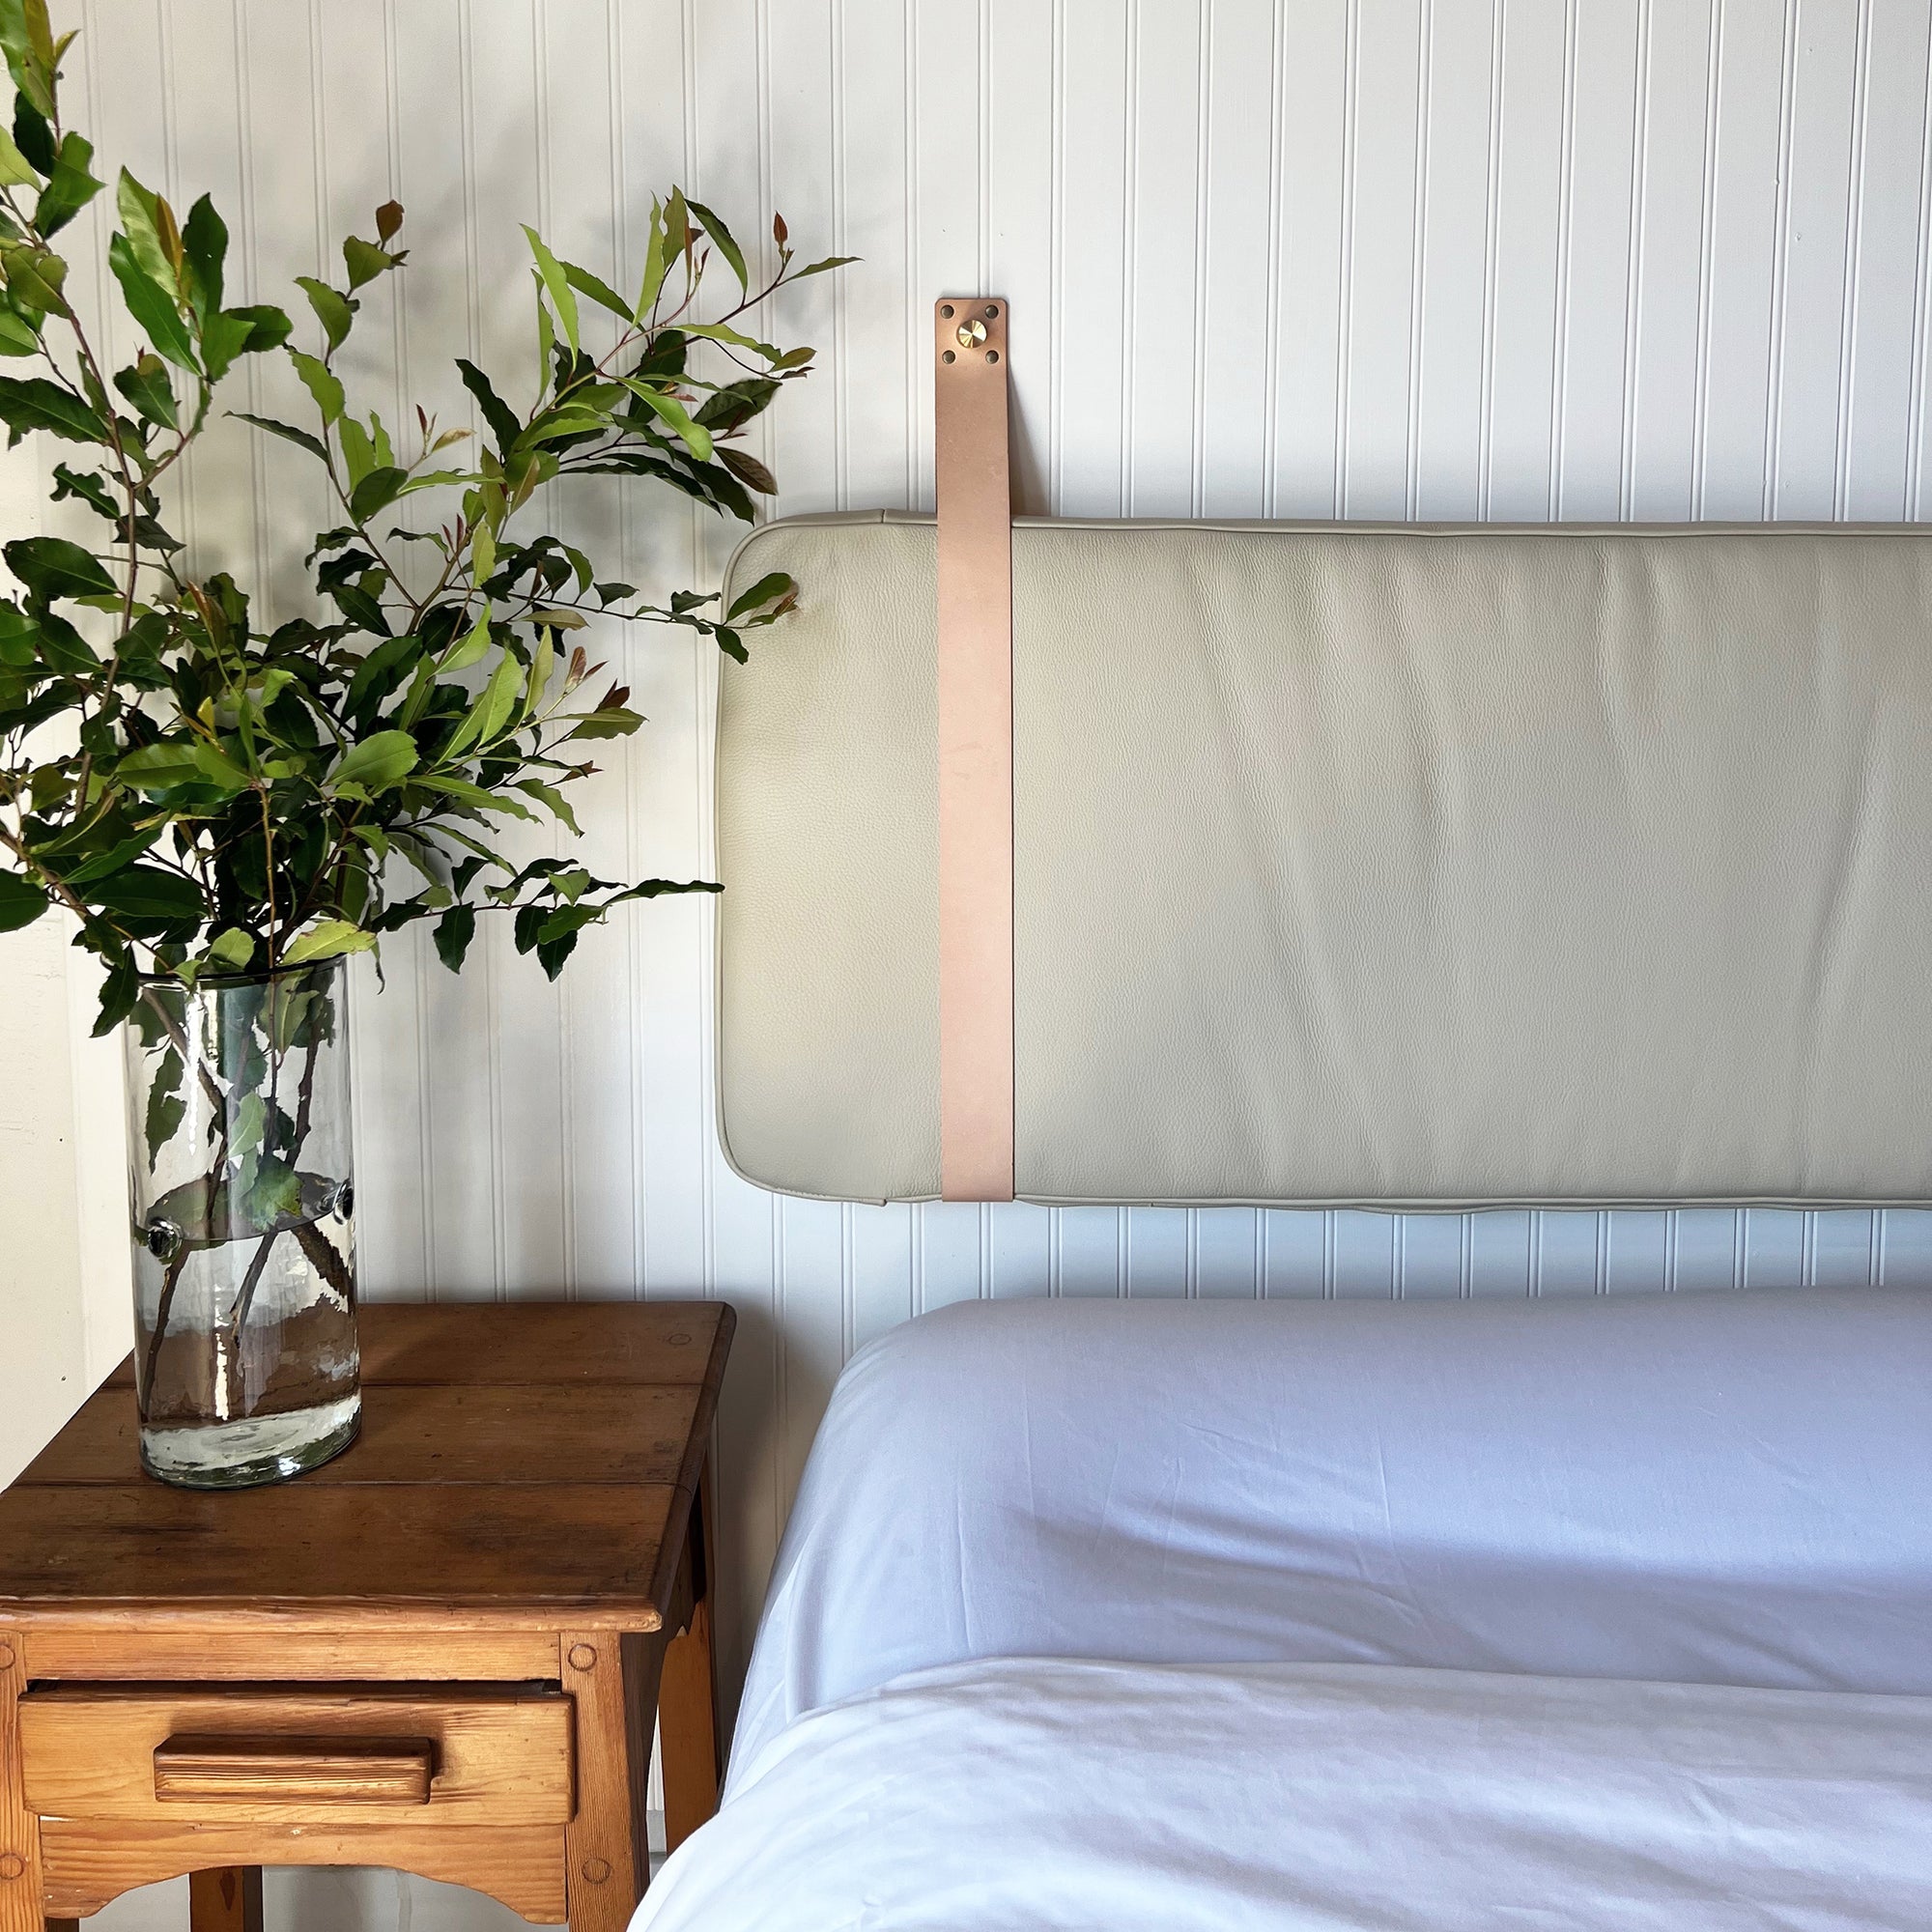 Sand Leather Headboard Cushion with Straps above a bed with no pillows. Wooden side table with a clear glass vase holding branches and leaves.